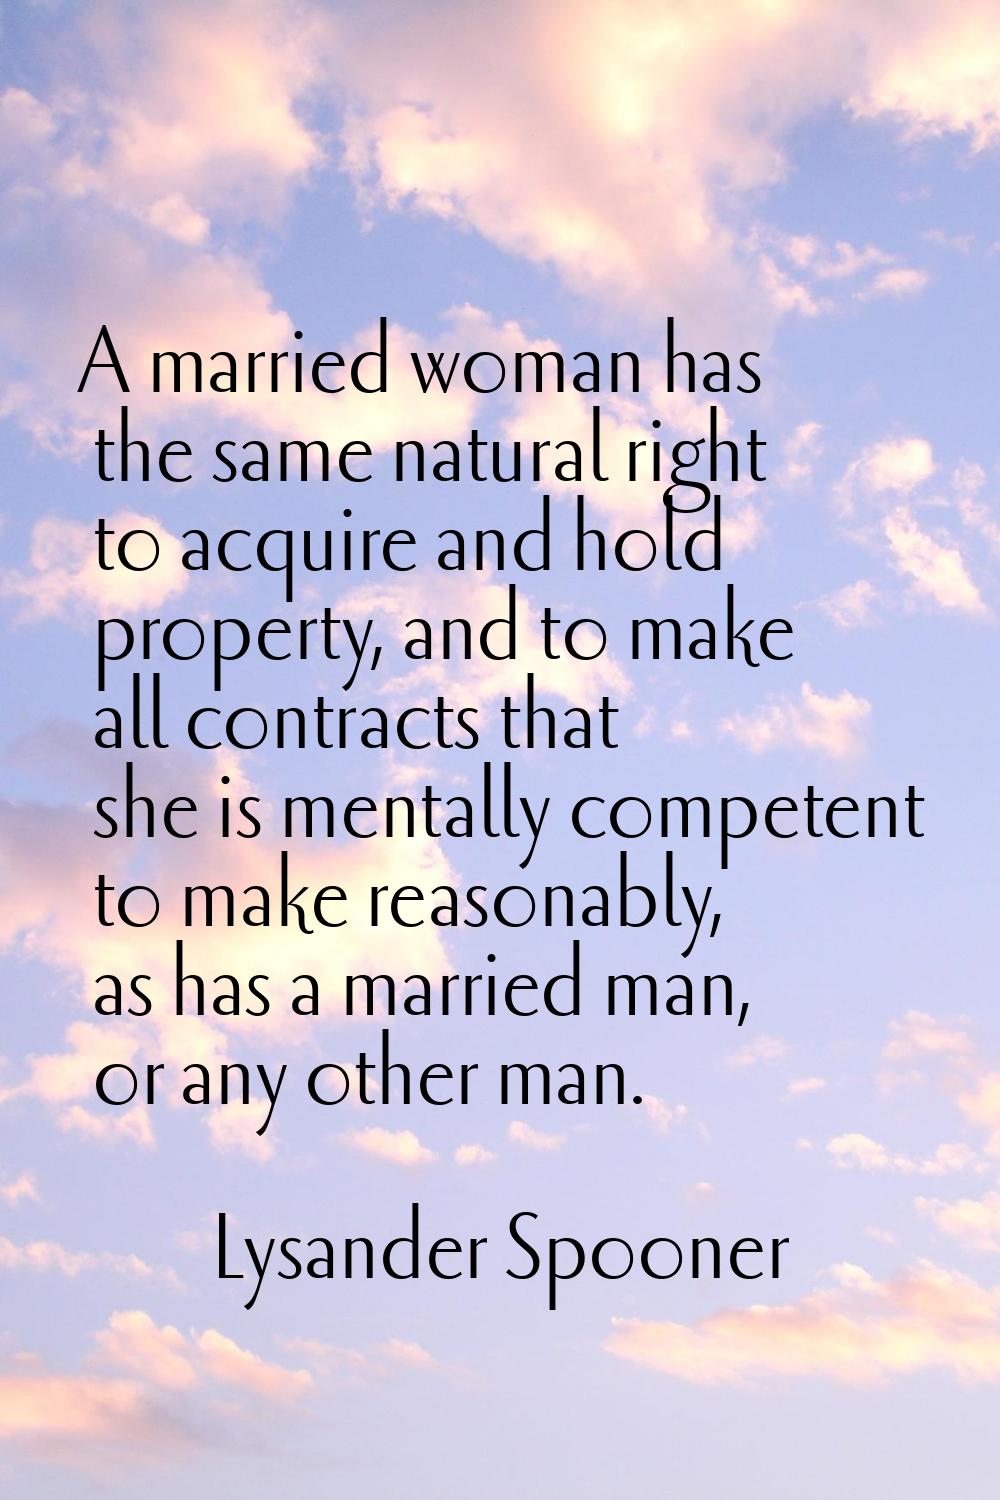 A married woman has the same natural right to acquire and hold property, and to make all contracts 